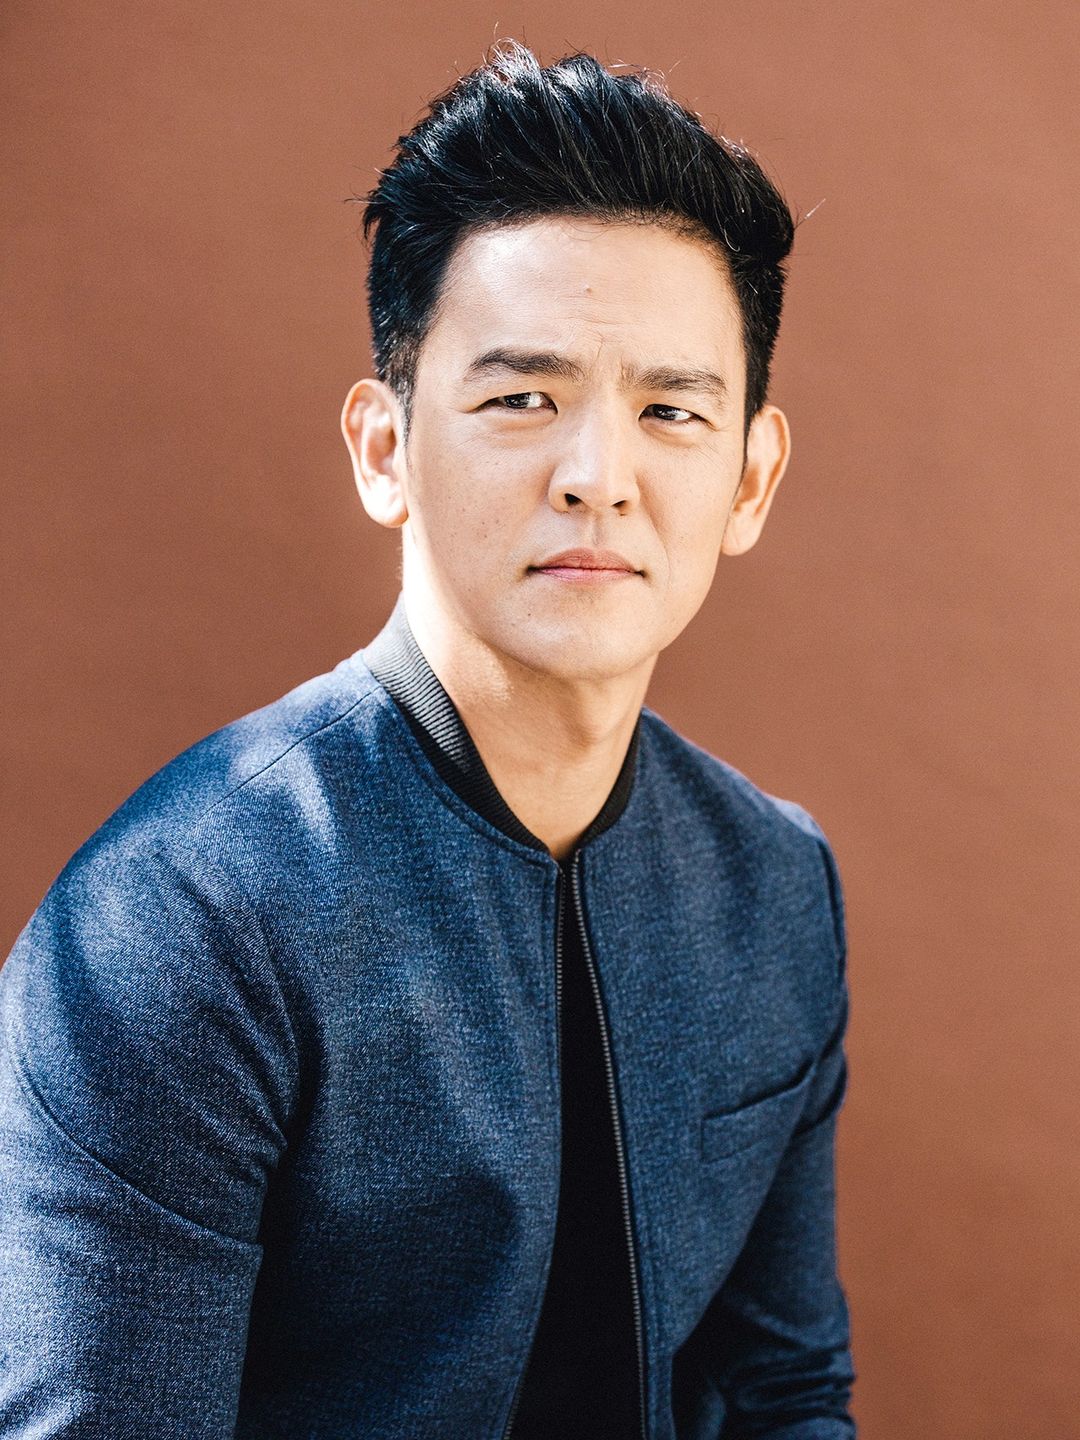 John Cho does he have a wife